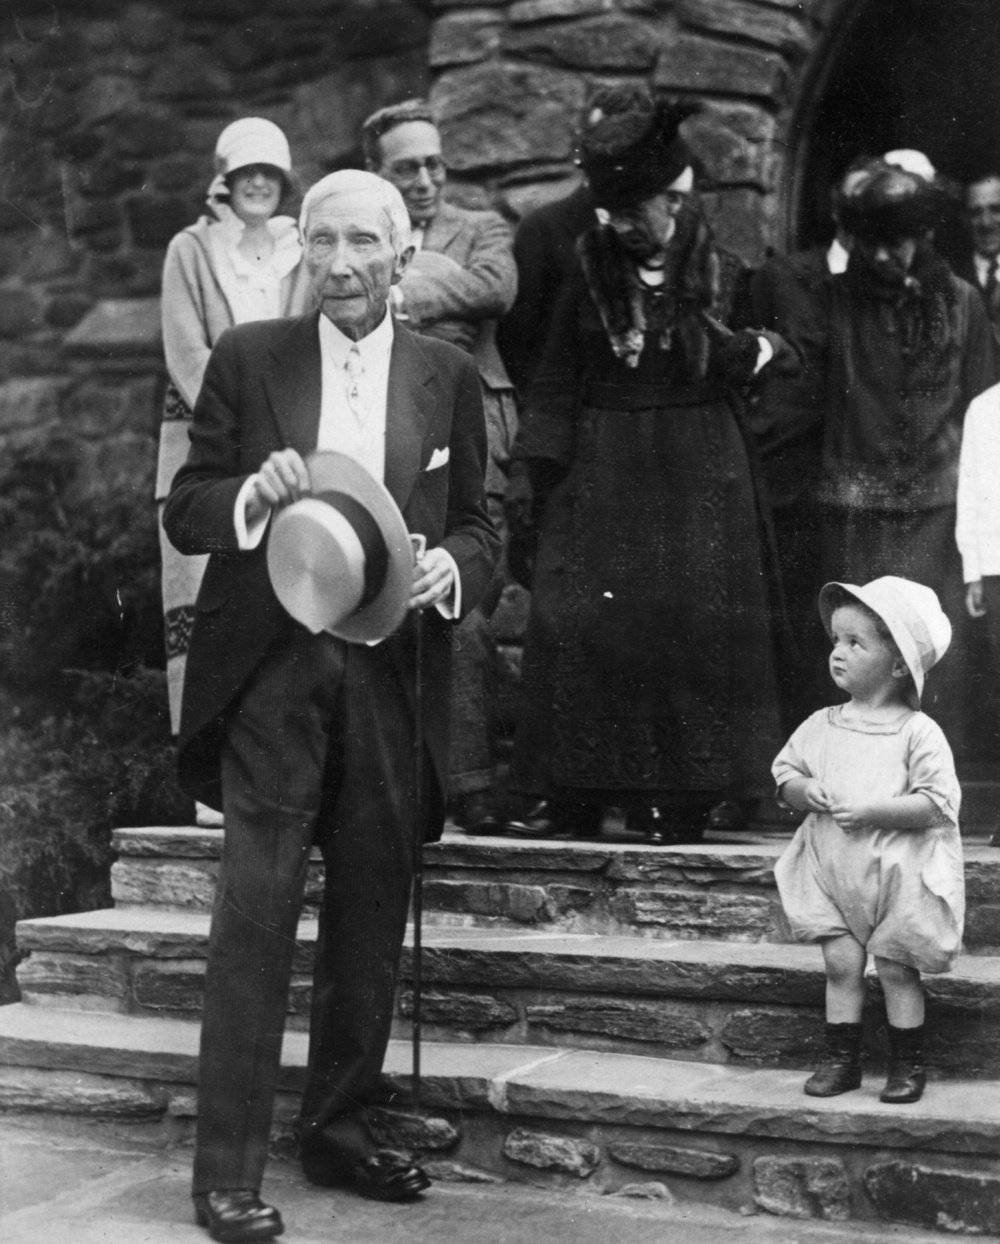 1923:  The millionaire John D Rockefeller (1839 - 1937) on his 84th birthday.  (Photo by Topical Press Agency/Getty Images)